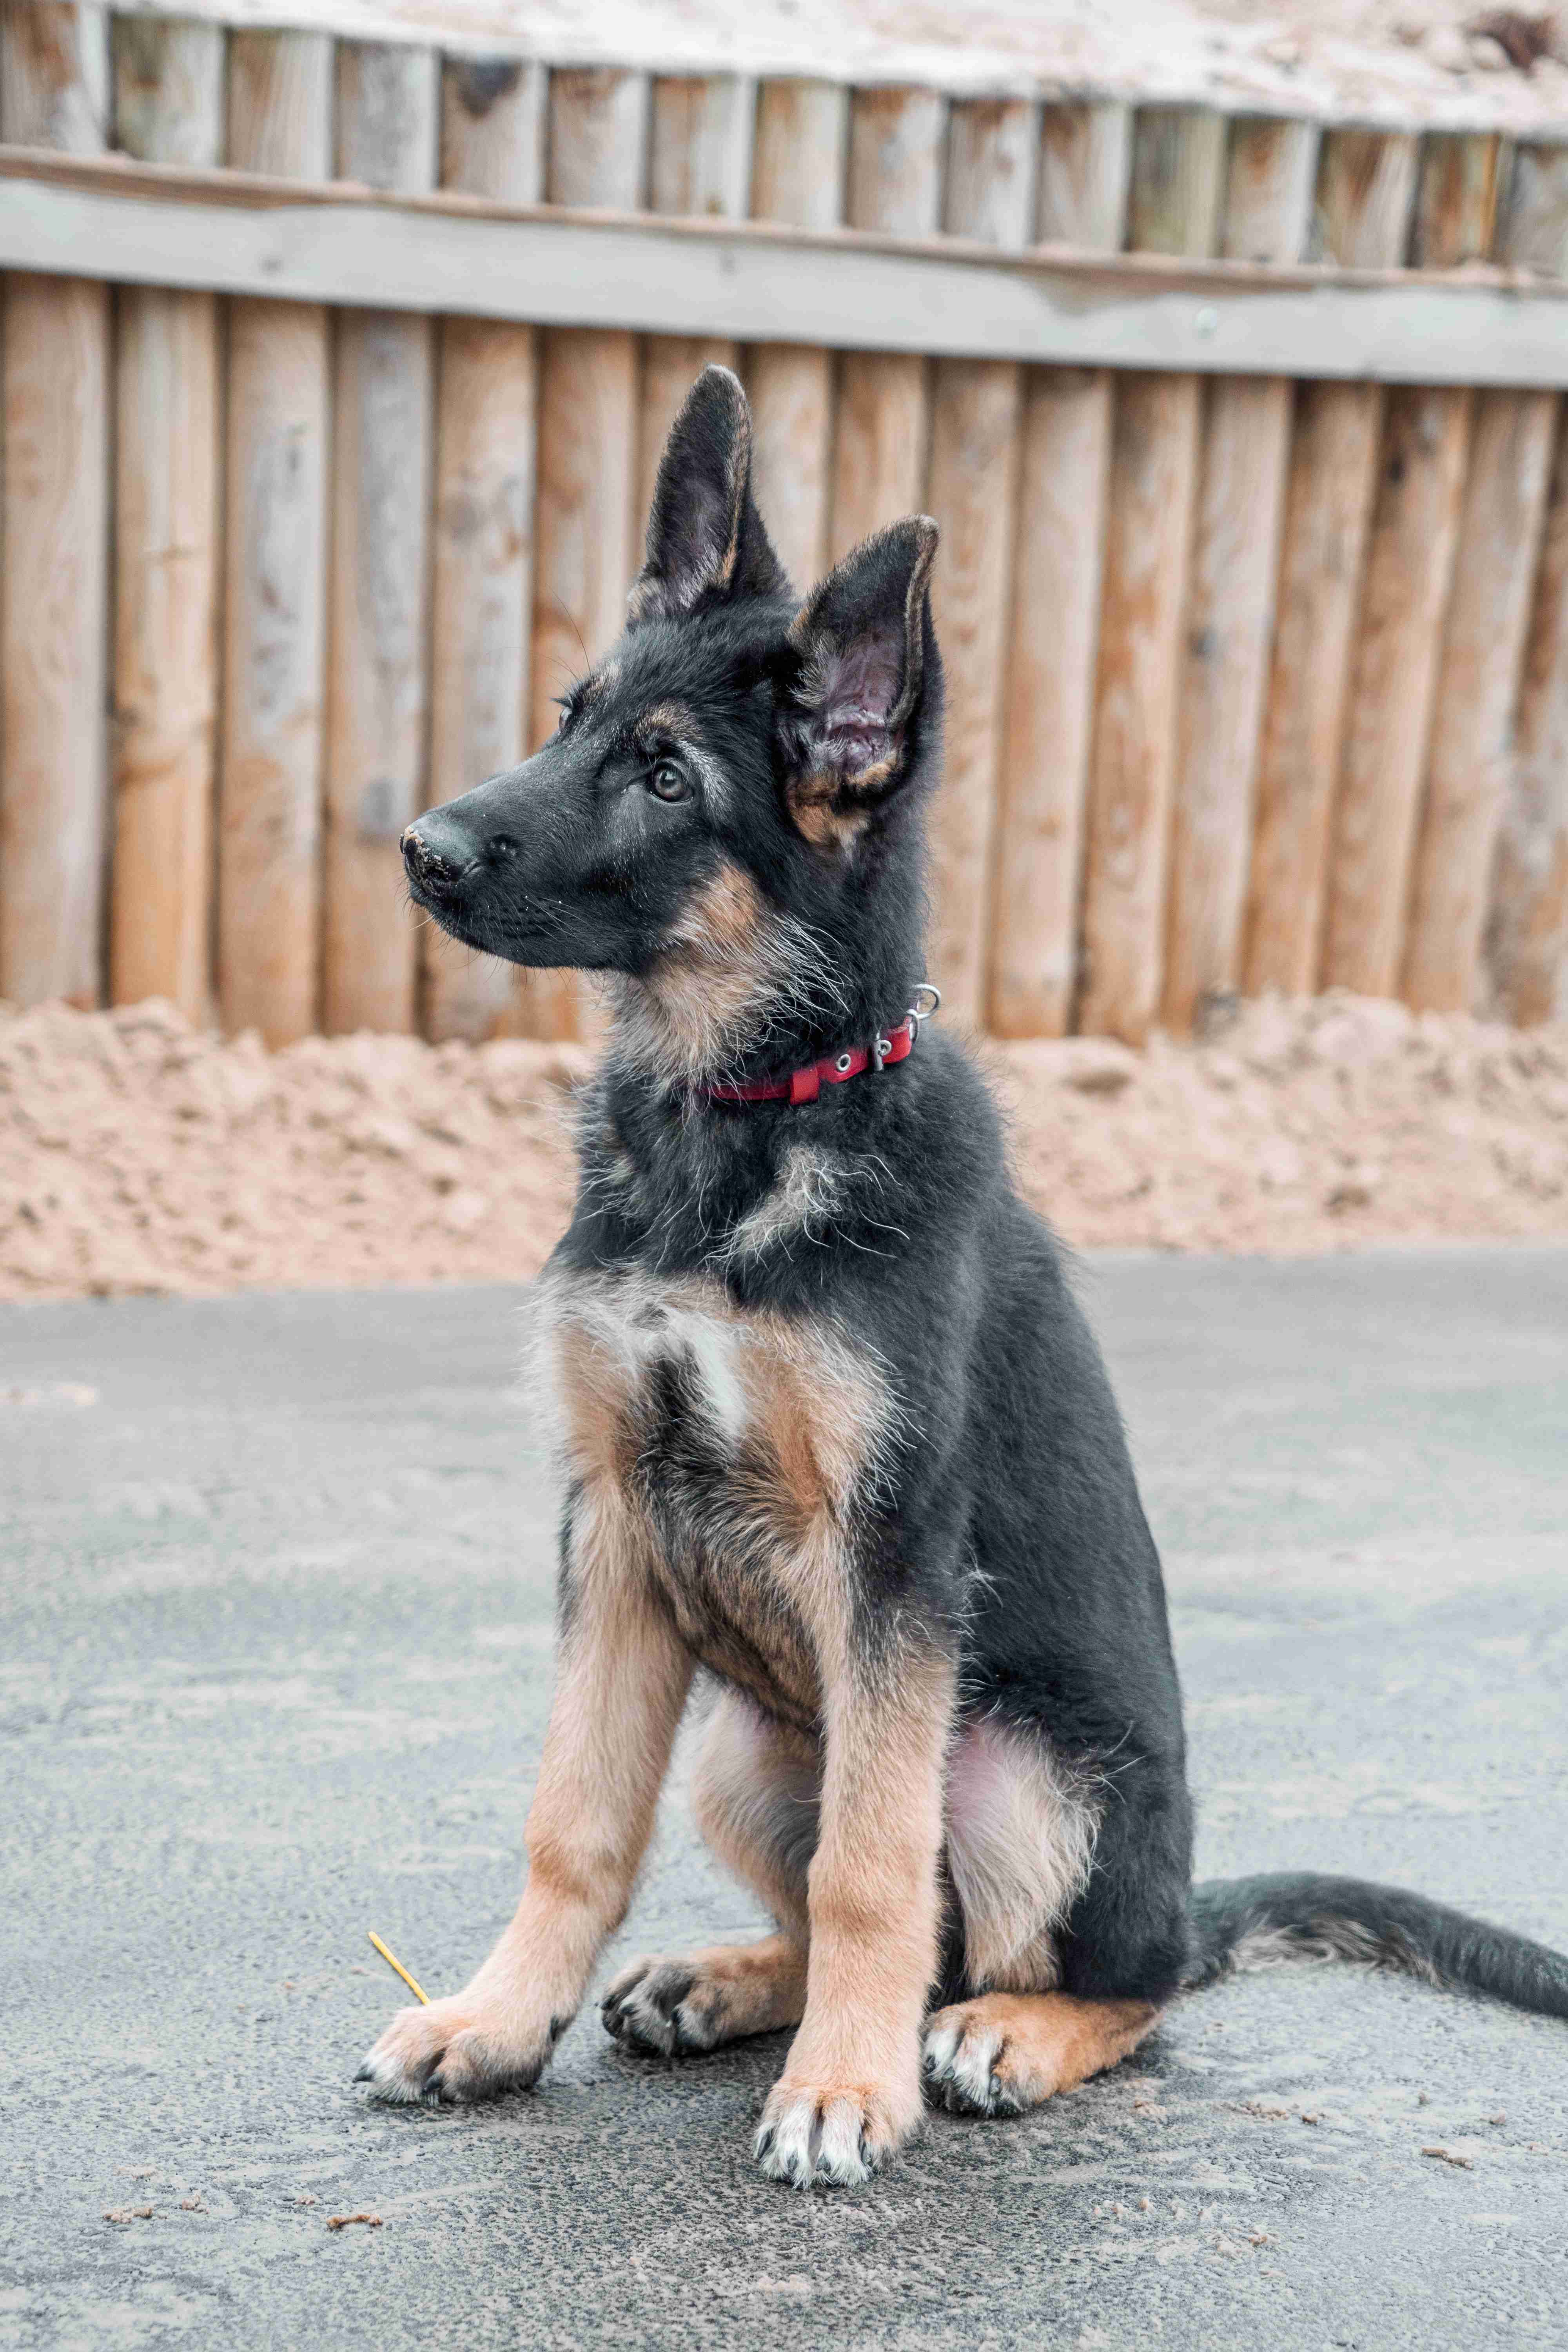 How can I prevent my German Shepherd from developing allergies to fleas?